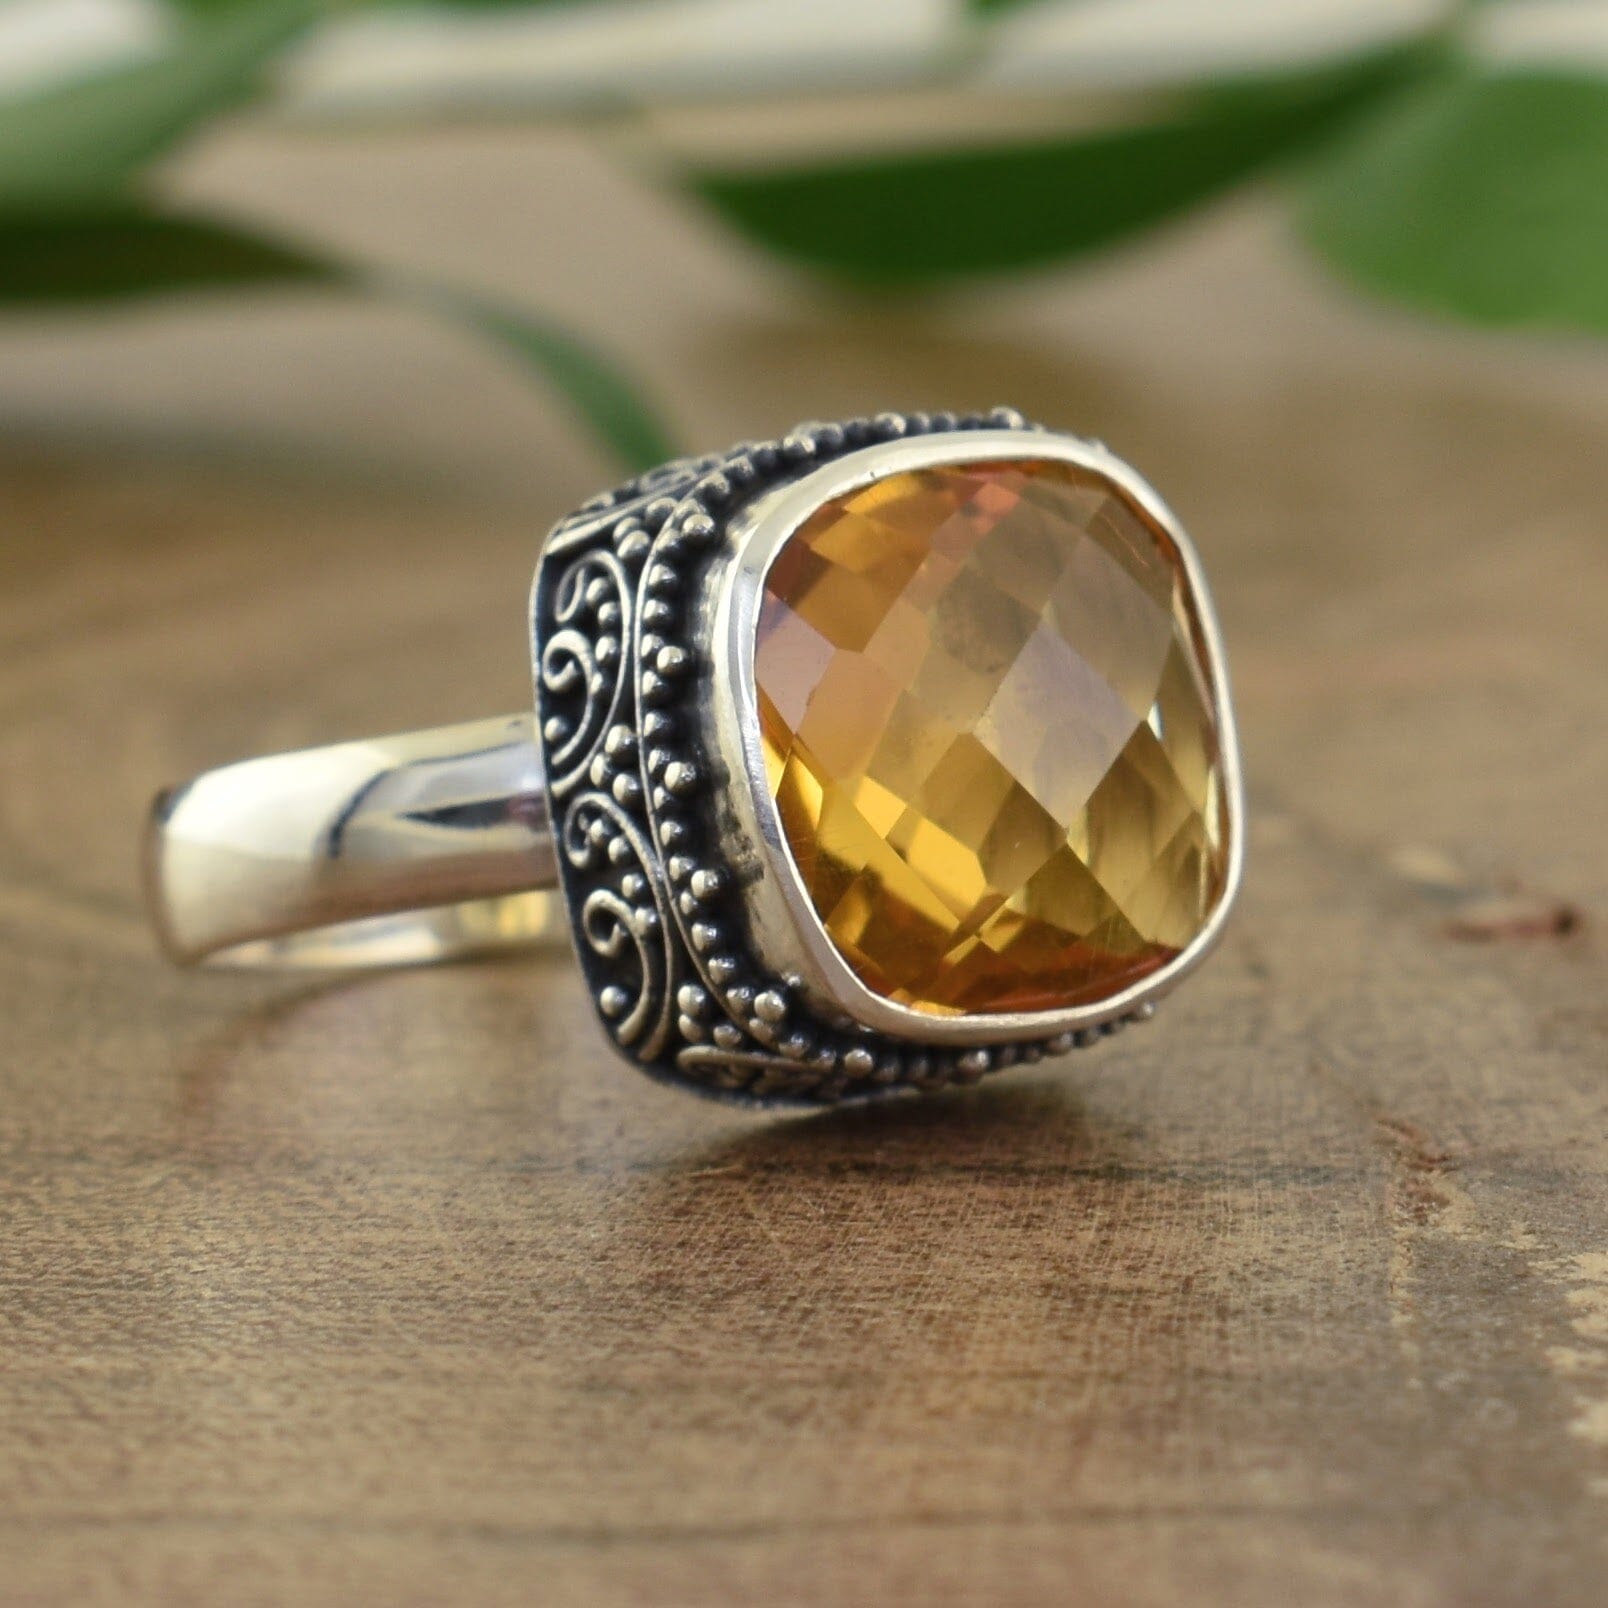 Sterling silver and citrine stone ring